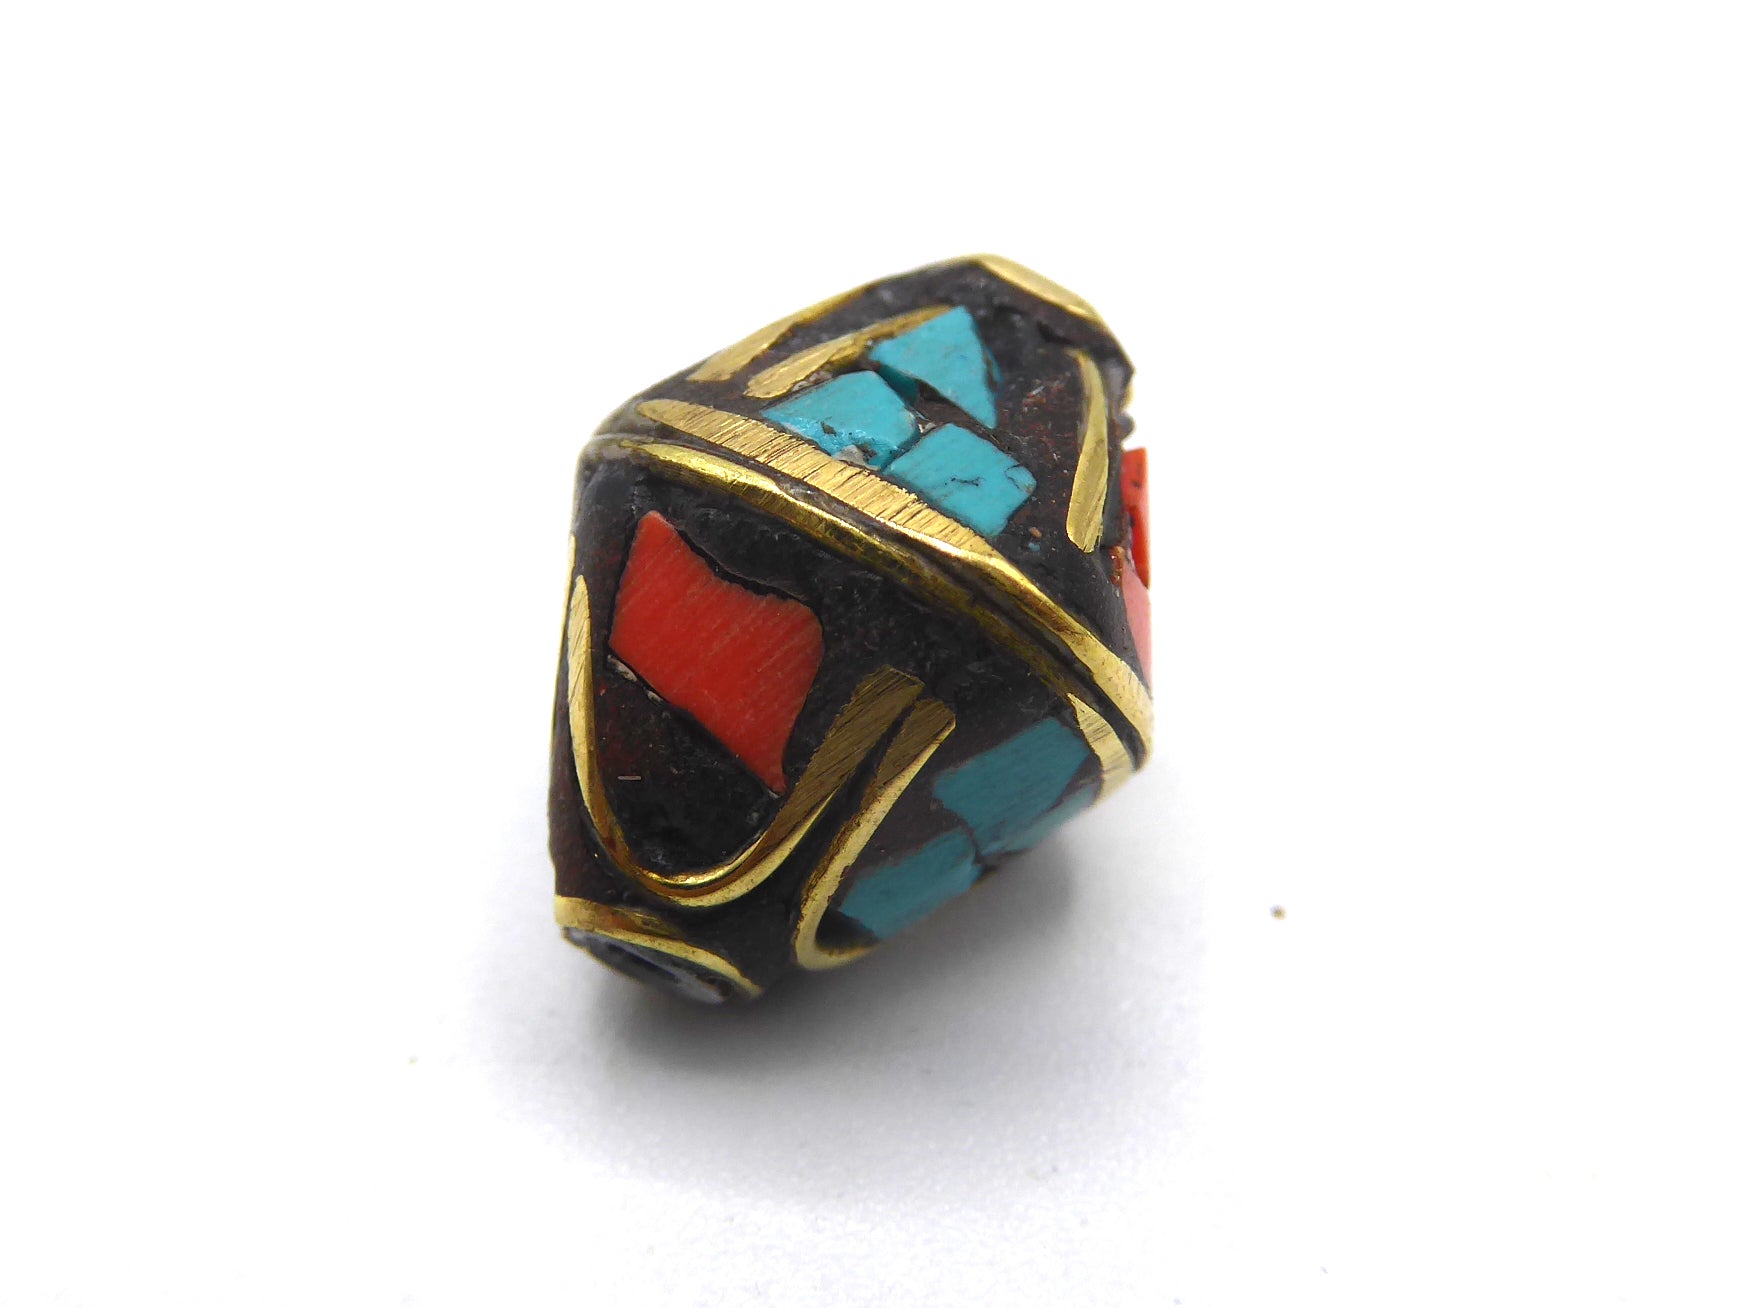 Tibetan Turquoise and Coral Inlaid Brass Beads, Diamond Shaped